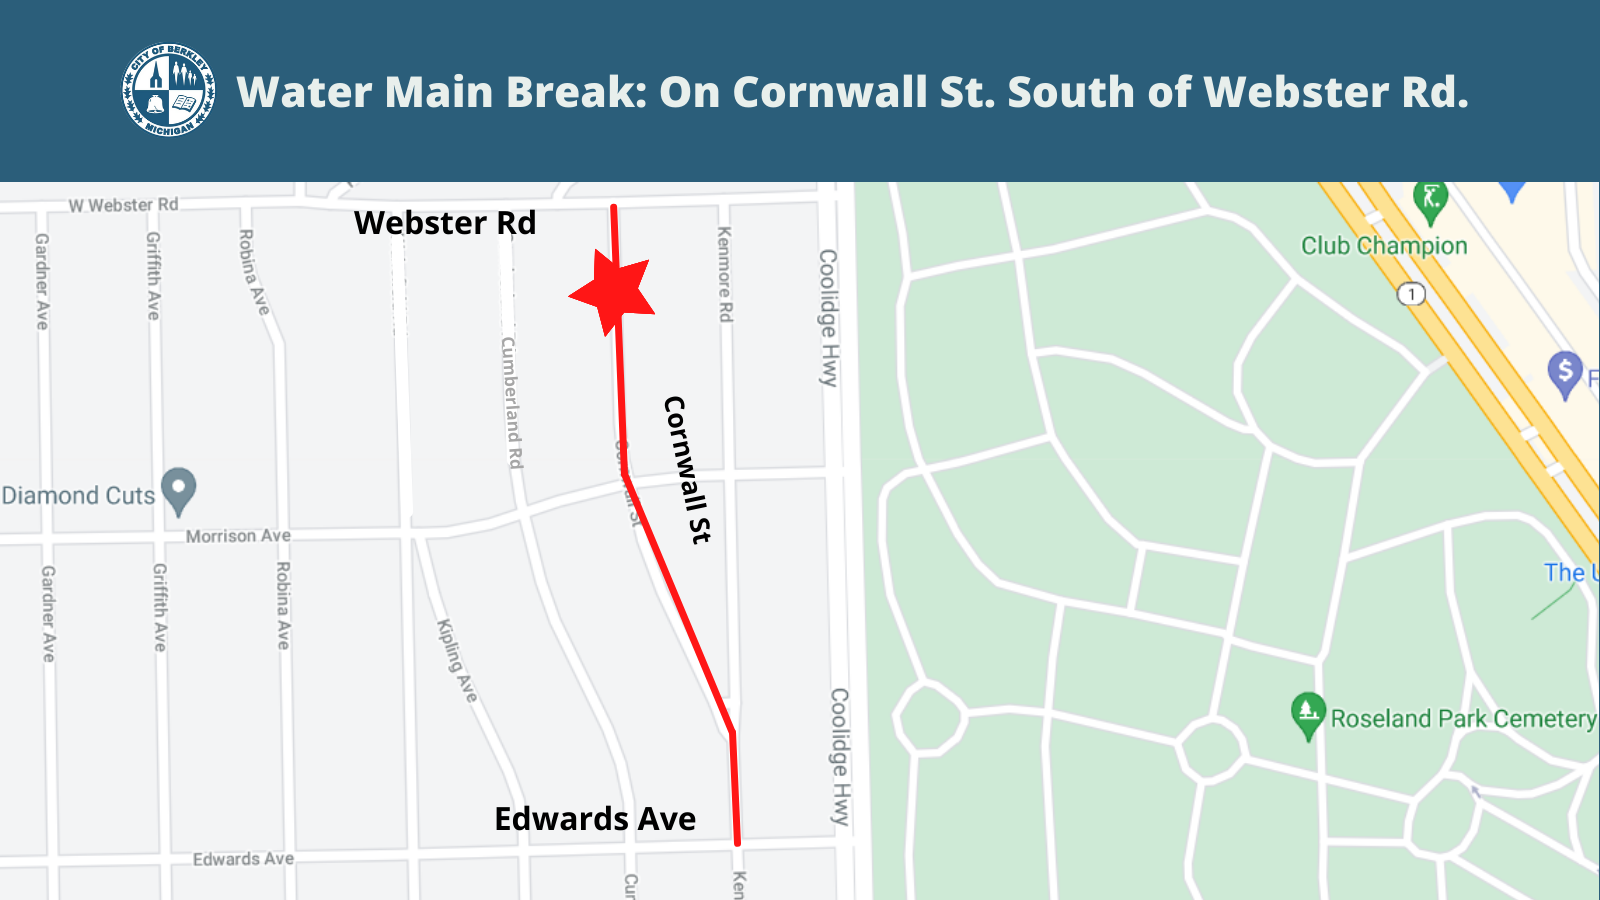 Water Main Break Map - On Cornwall St. South of Webster Rd.